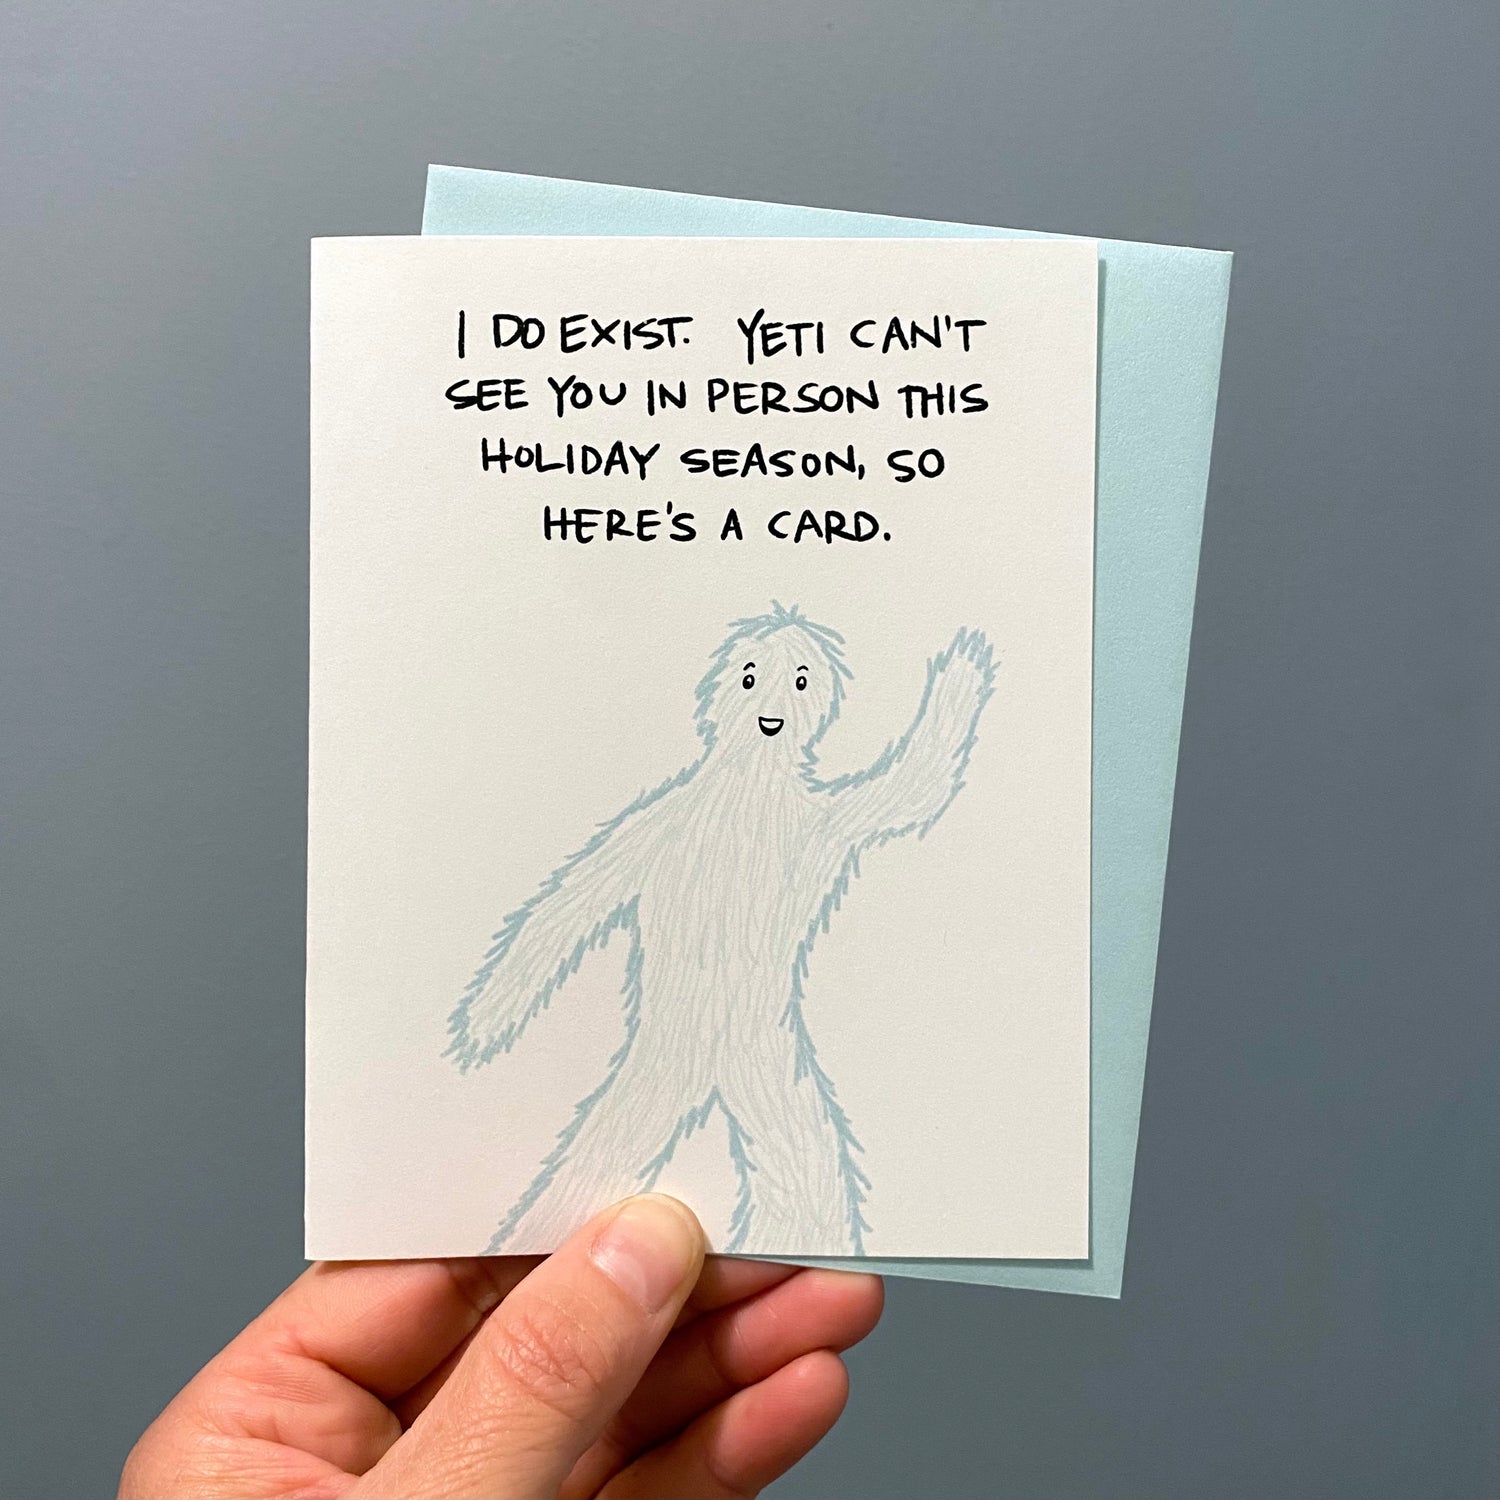 Image of a hand holding a funny holiday card with a waving yeti.